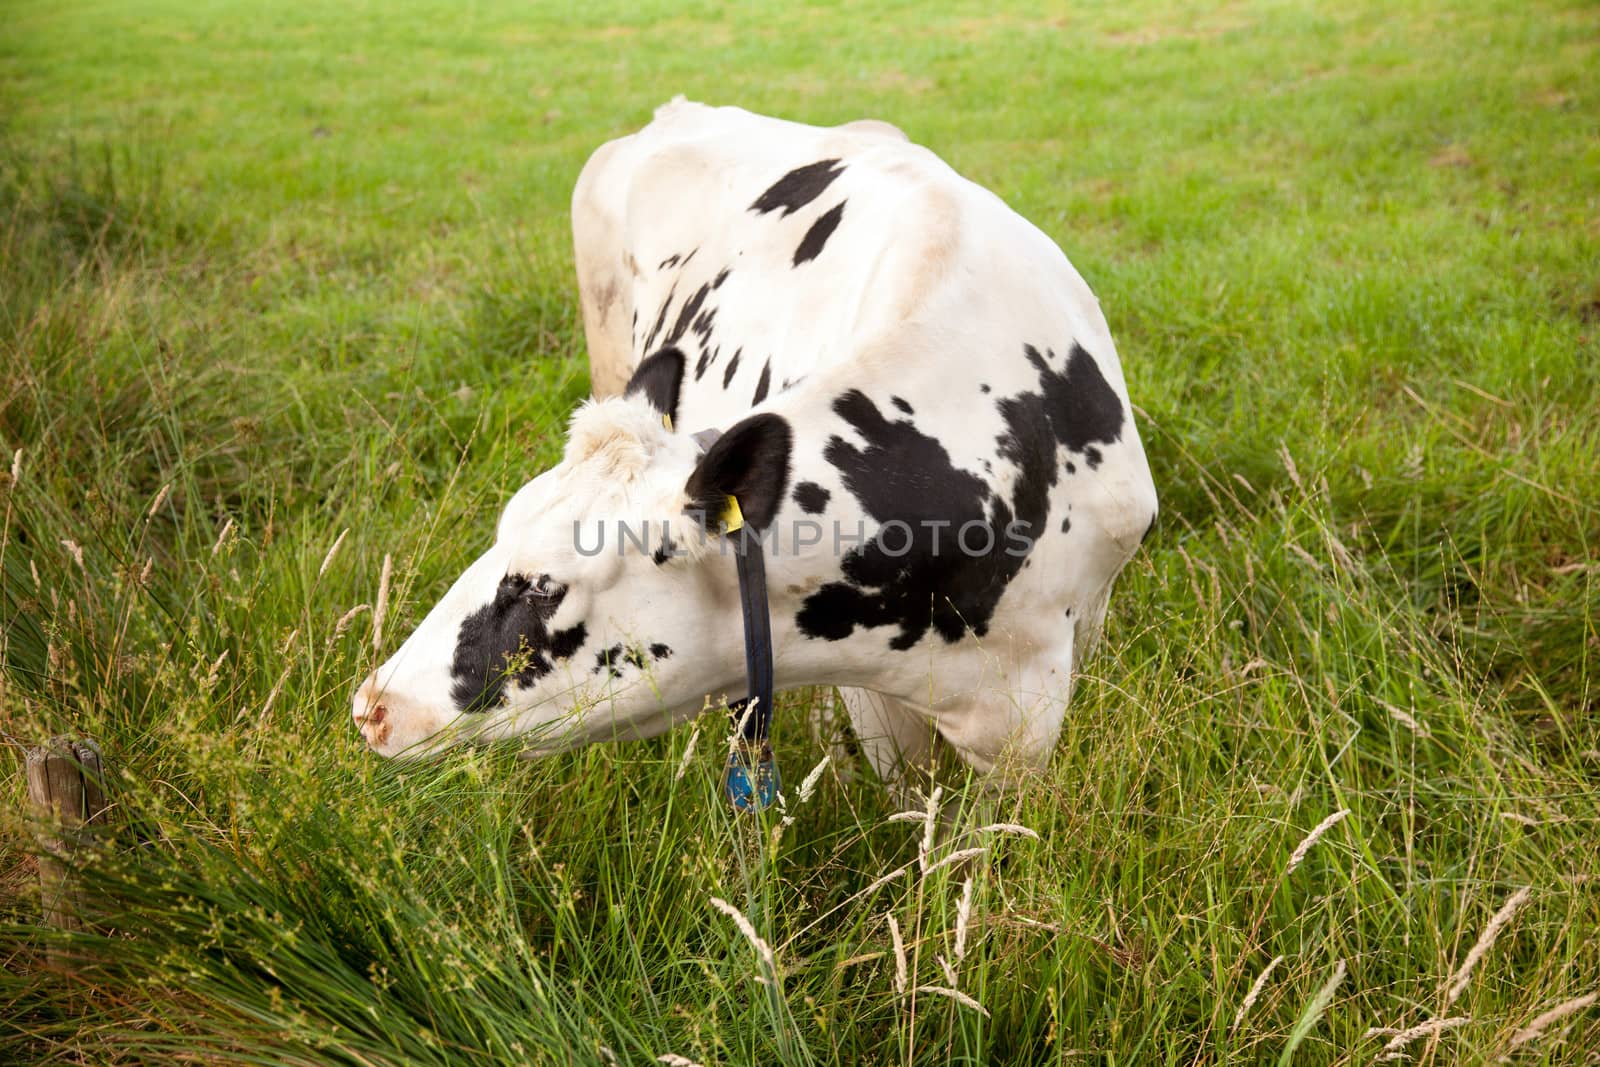 white cow with black spots grazing in ditch